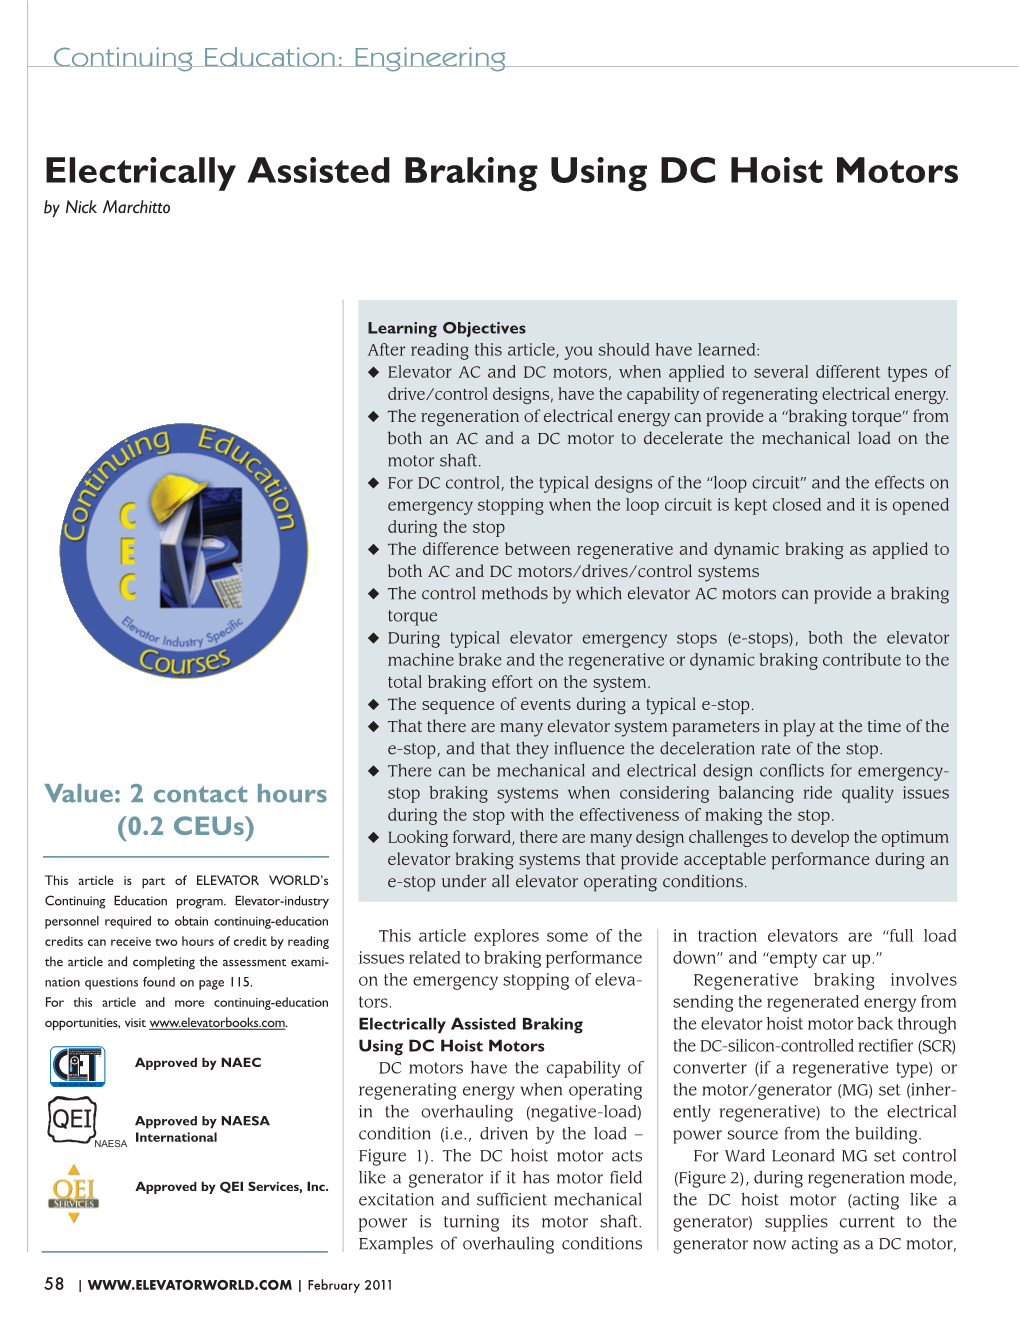 Electrically Assisted Braking Using DC Hoist Motors by Nick Marchitto